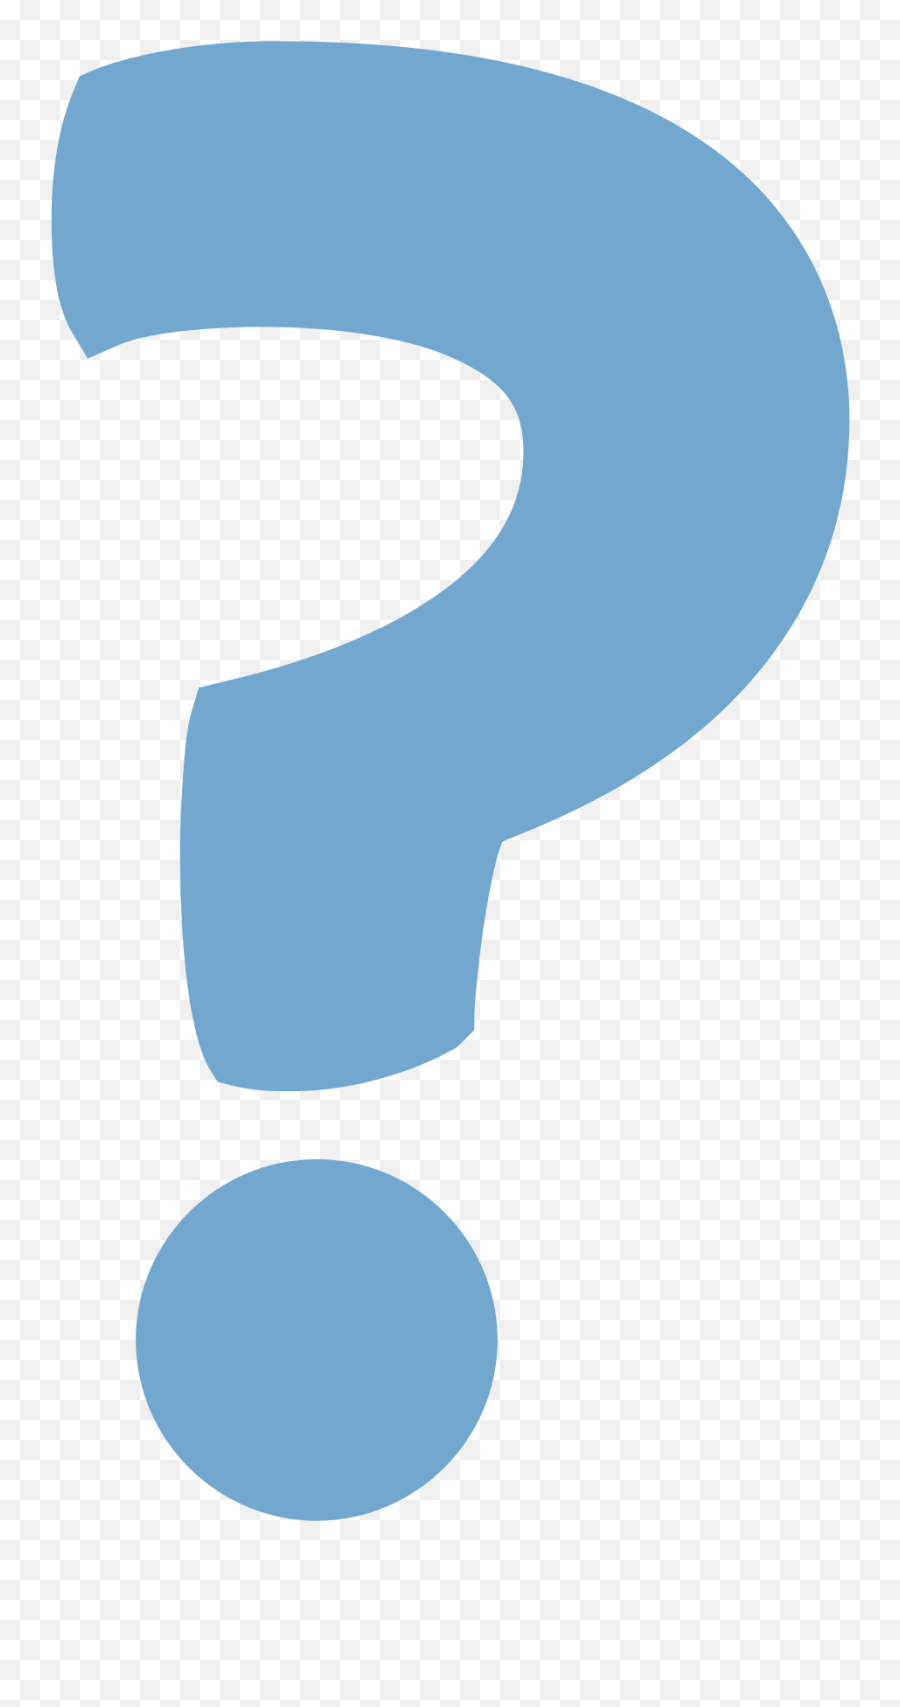 Filehelp Icon - 72a7cfsvg Wikimedia Commons Dot Png,Question Help Icon